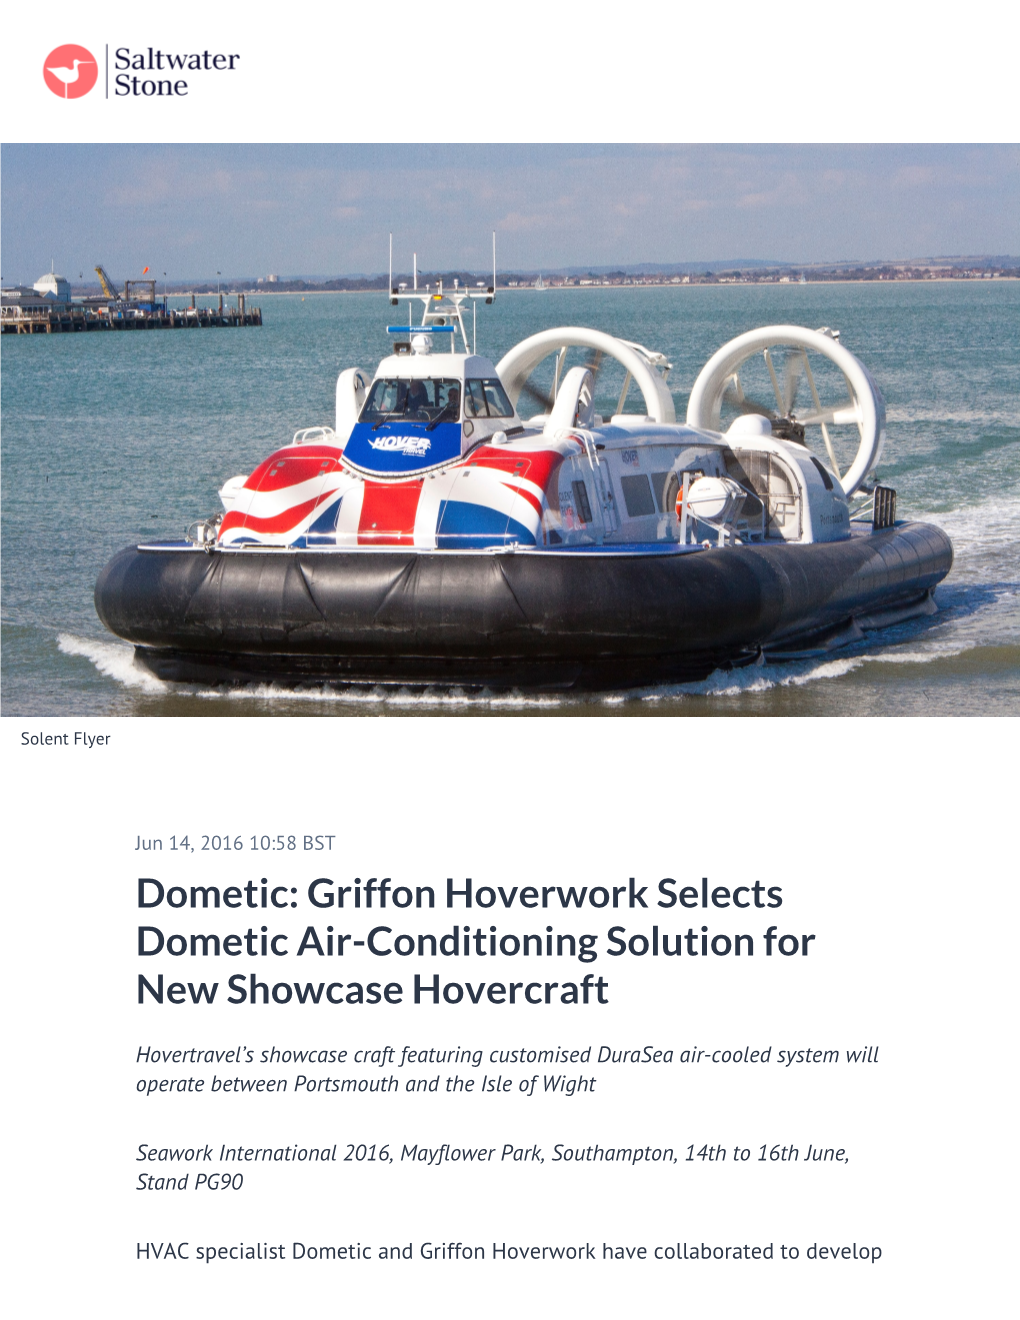 Griffon Hoverwork Selects Dometic Air-Conditioning Solution for New Showcase Hovercraft